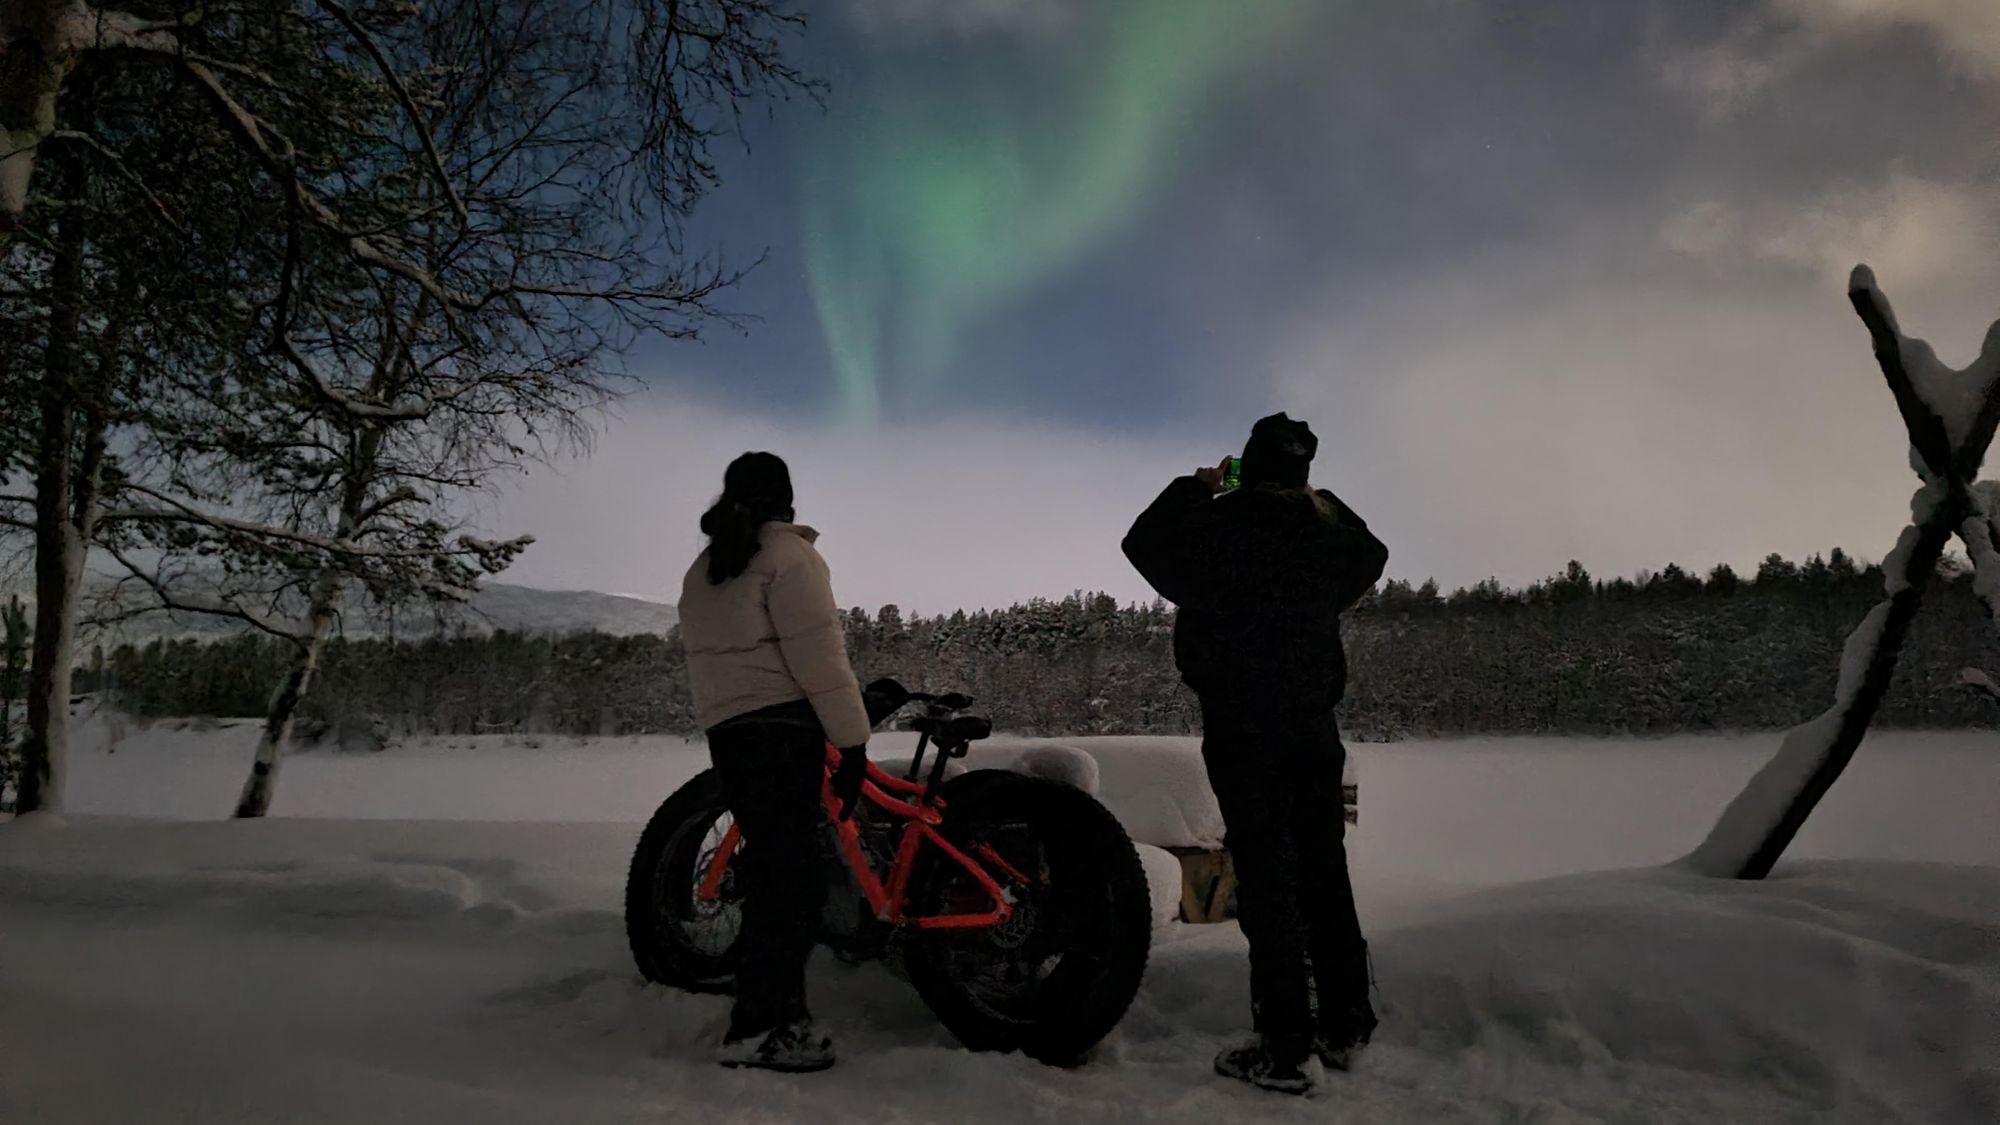 The northern lights blaze in the sky as two people watch, fat bikes by their sides.